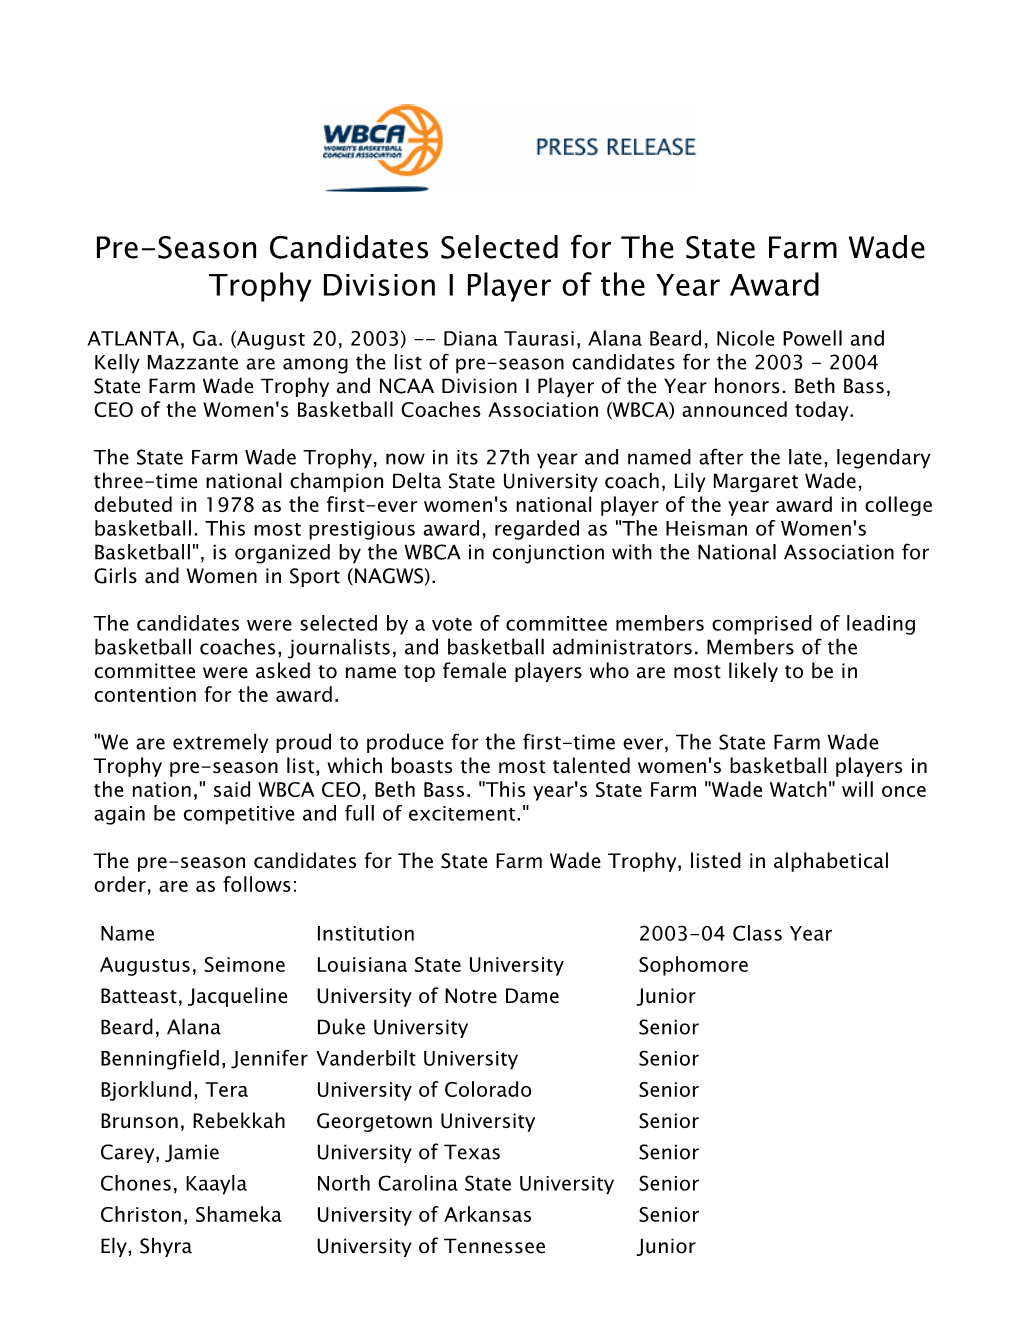 Pre-Season Candidates Selected for the State Farm Wade Trophy Division I Player of the Year Award